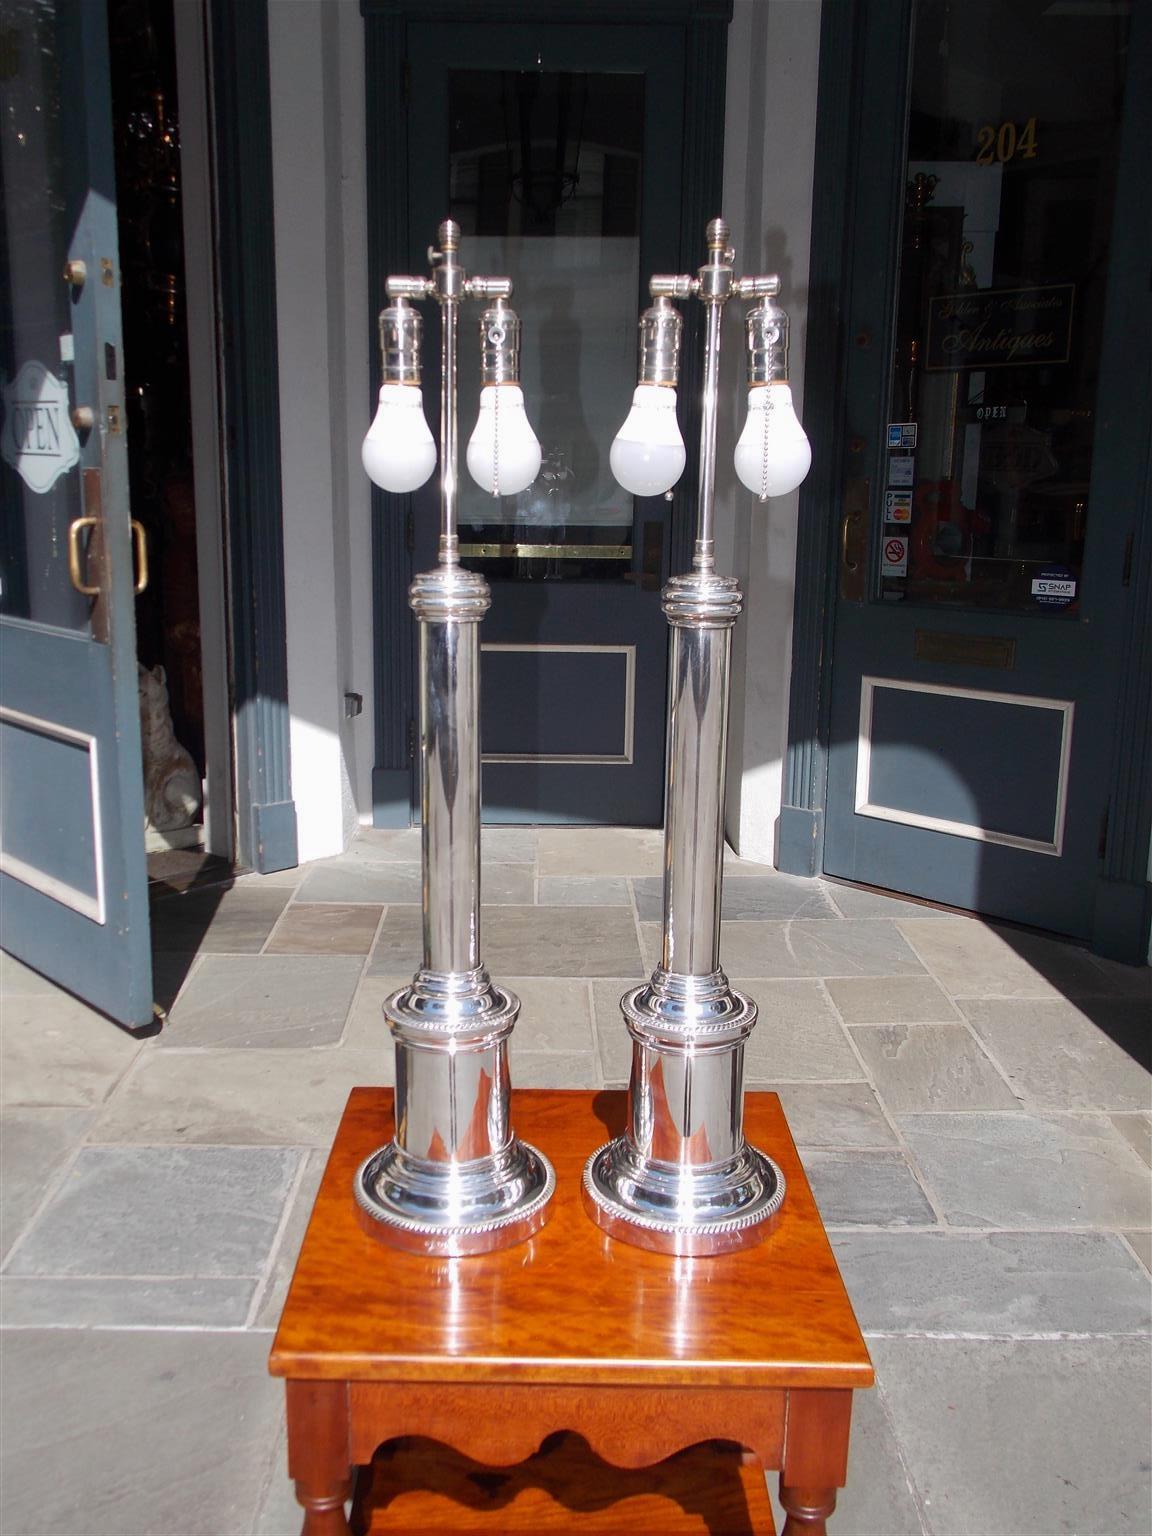 Pair of English nickel silver circular column table lamps with decorative rope motif and resting on step back circular plinth bases, Late 19th century. Stamped by maker. Lamps were originally gas and have been electrified.